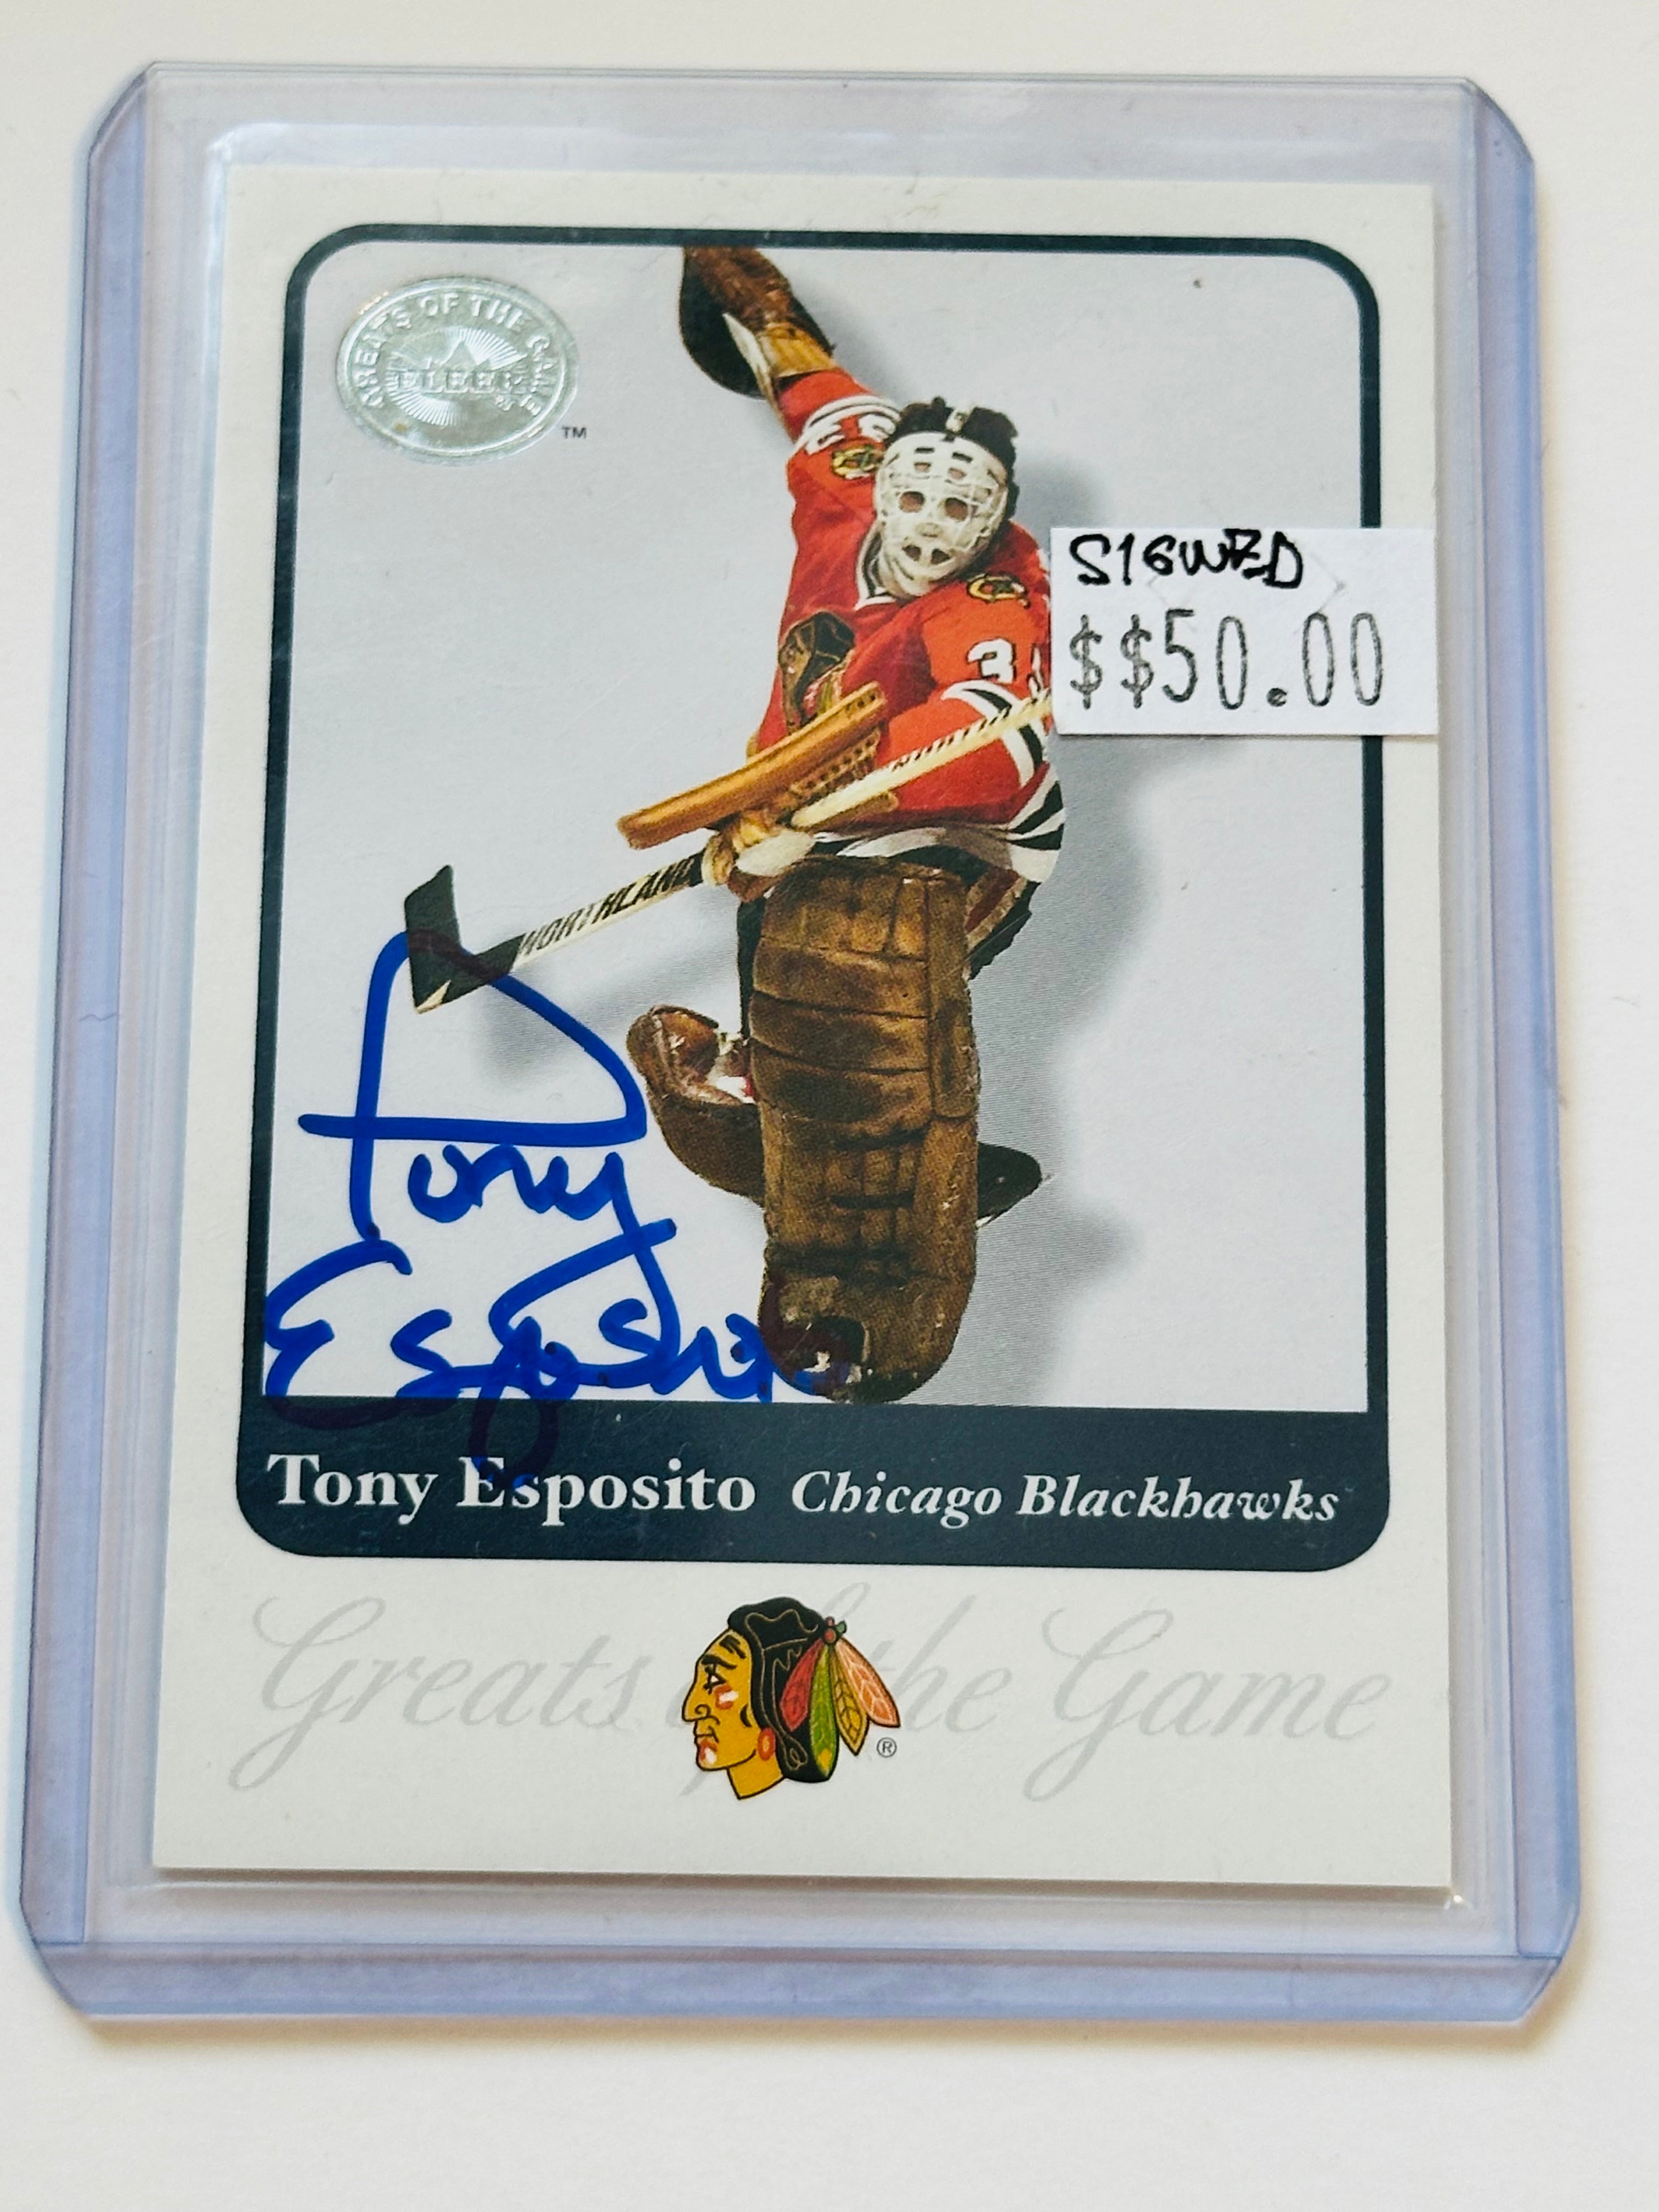 Tony Esposito goalie hockey, legend autograph in person card sold with certificate of authenticity ￼